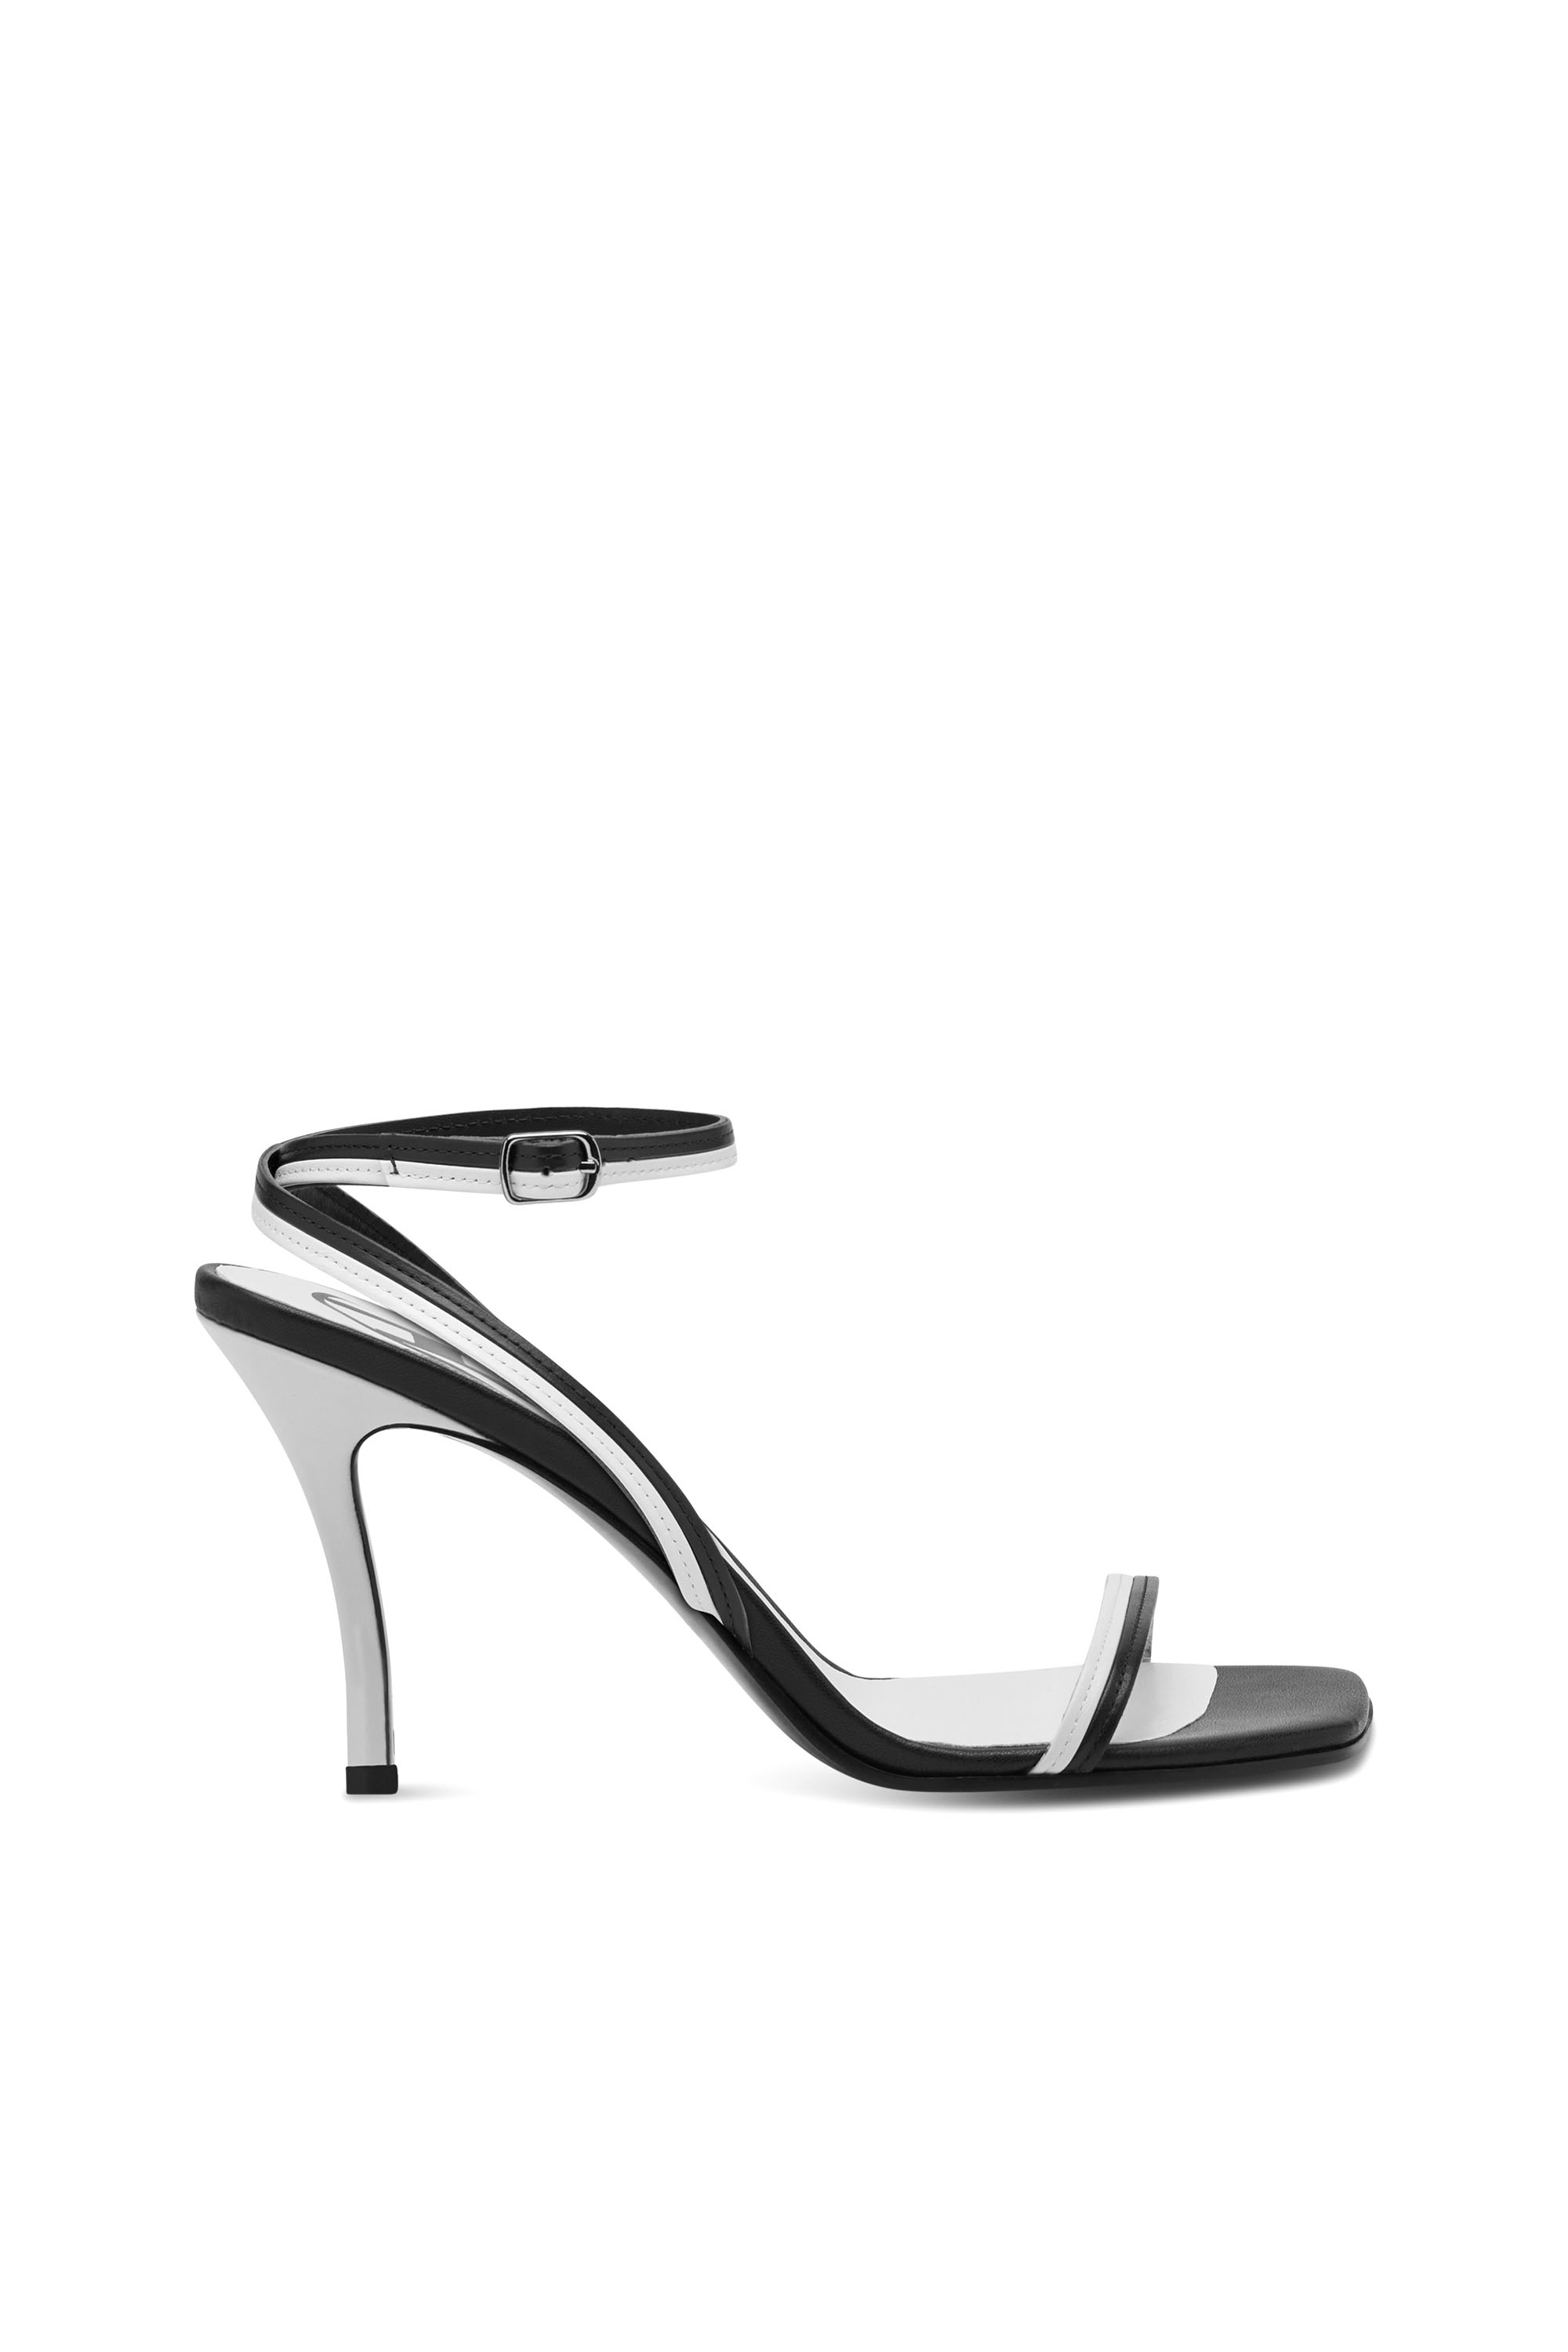 DIESEL STRAPPY SANDALS IN TWO-TONE LEATHER